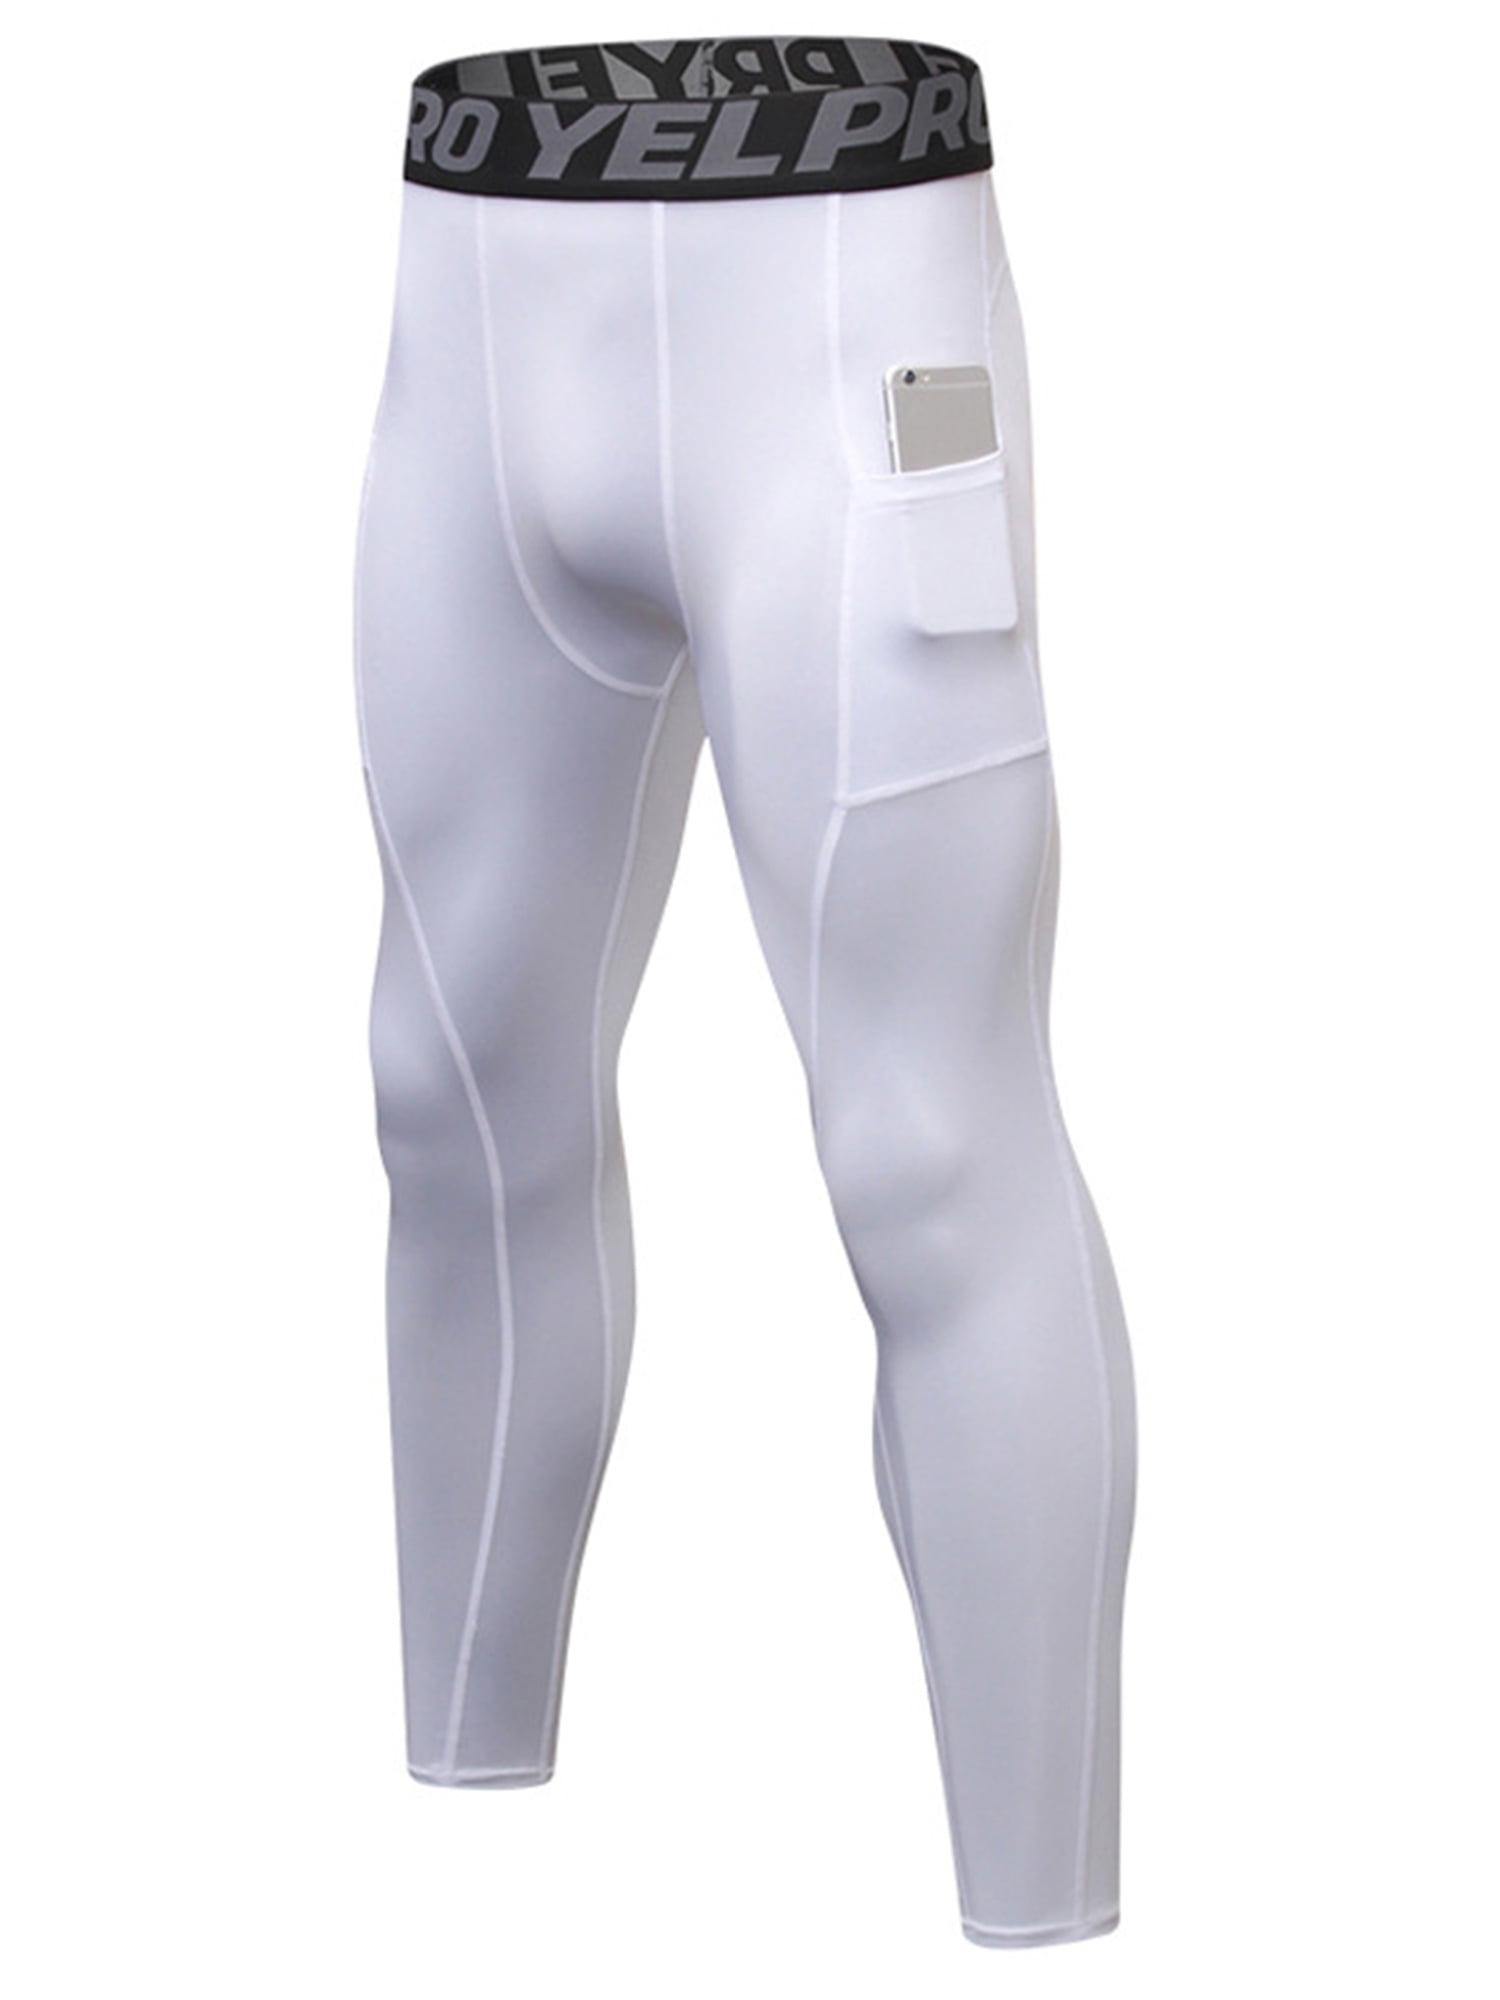 Mens Sports Workout Compression Fitness Running Base layer Tights Pants Cool Dry